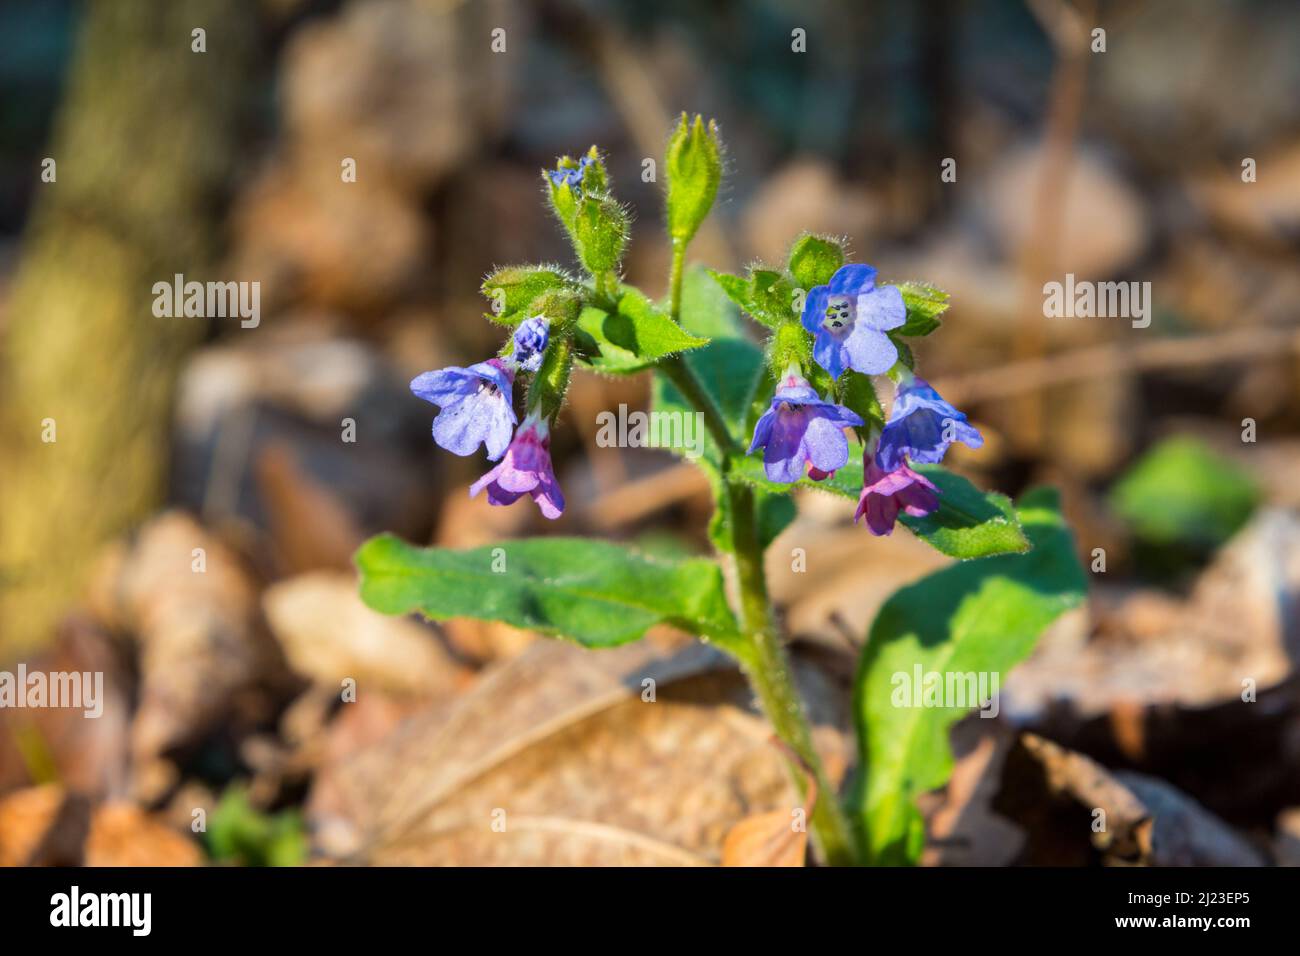 Closeup of lungwort (Pulmonaria officinalis) flowers in early spring Stock Photo